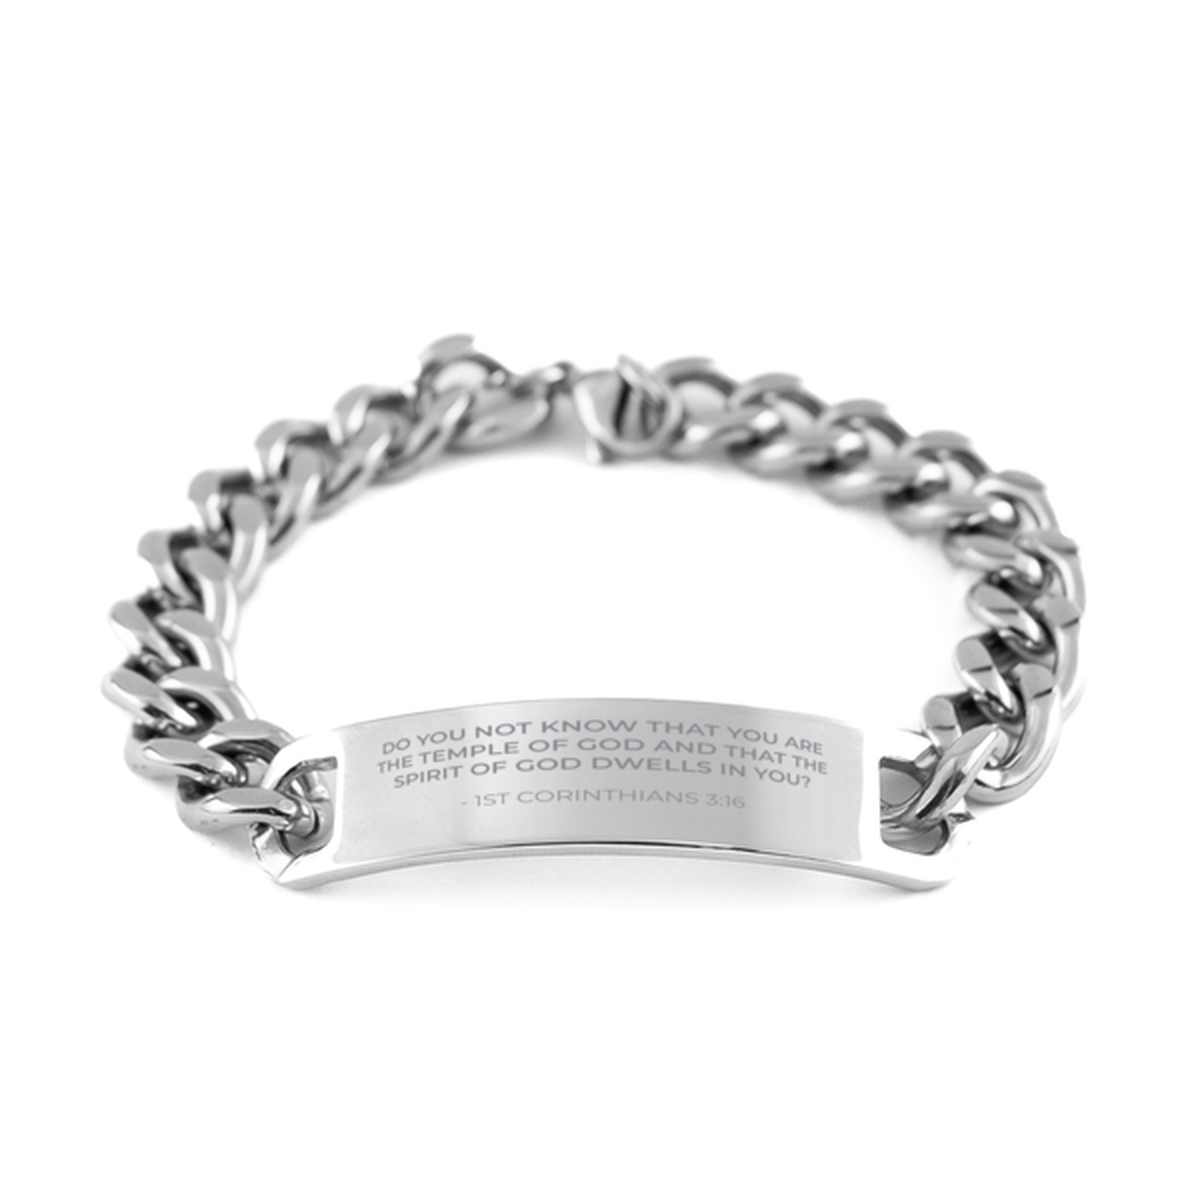 Bible Verse Chain Stainless Steel Bracelet, 1St Corinthians 3:16 Do You Not Know That You Are The Temple Of God, Inspirational Christian Gifts For Men Women